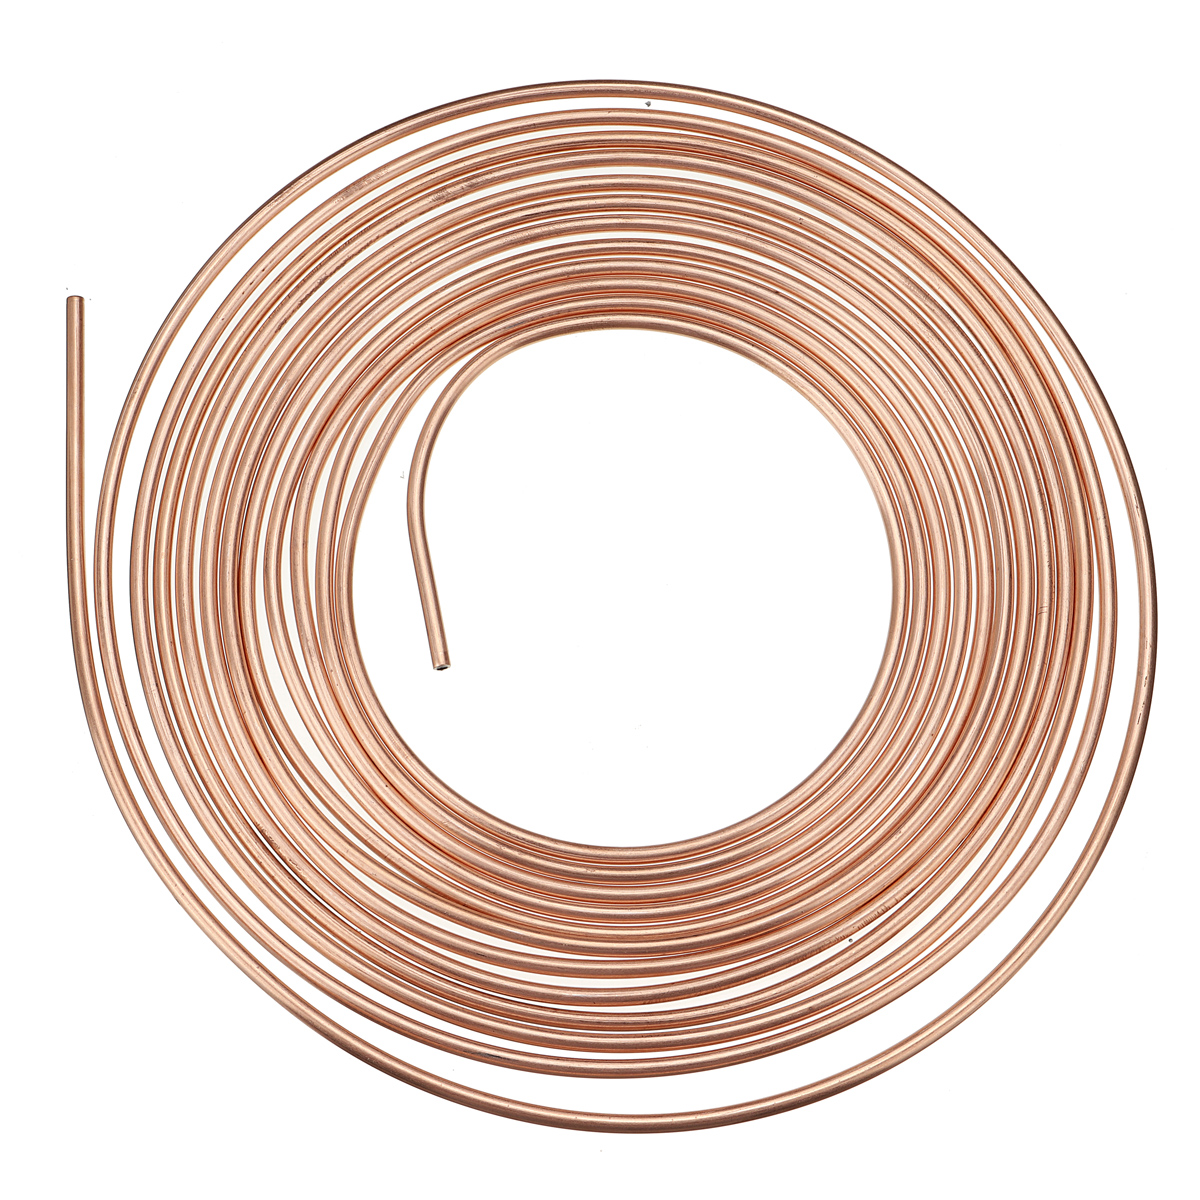 Universal-25Ft-Copper-Nickel-Brake-Line-Tubing-Kit-316quot-OD-with-15Pcs-Nuts-1586631-7